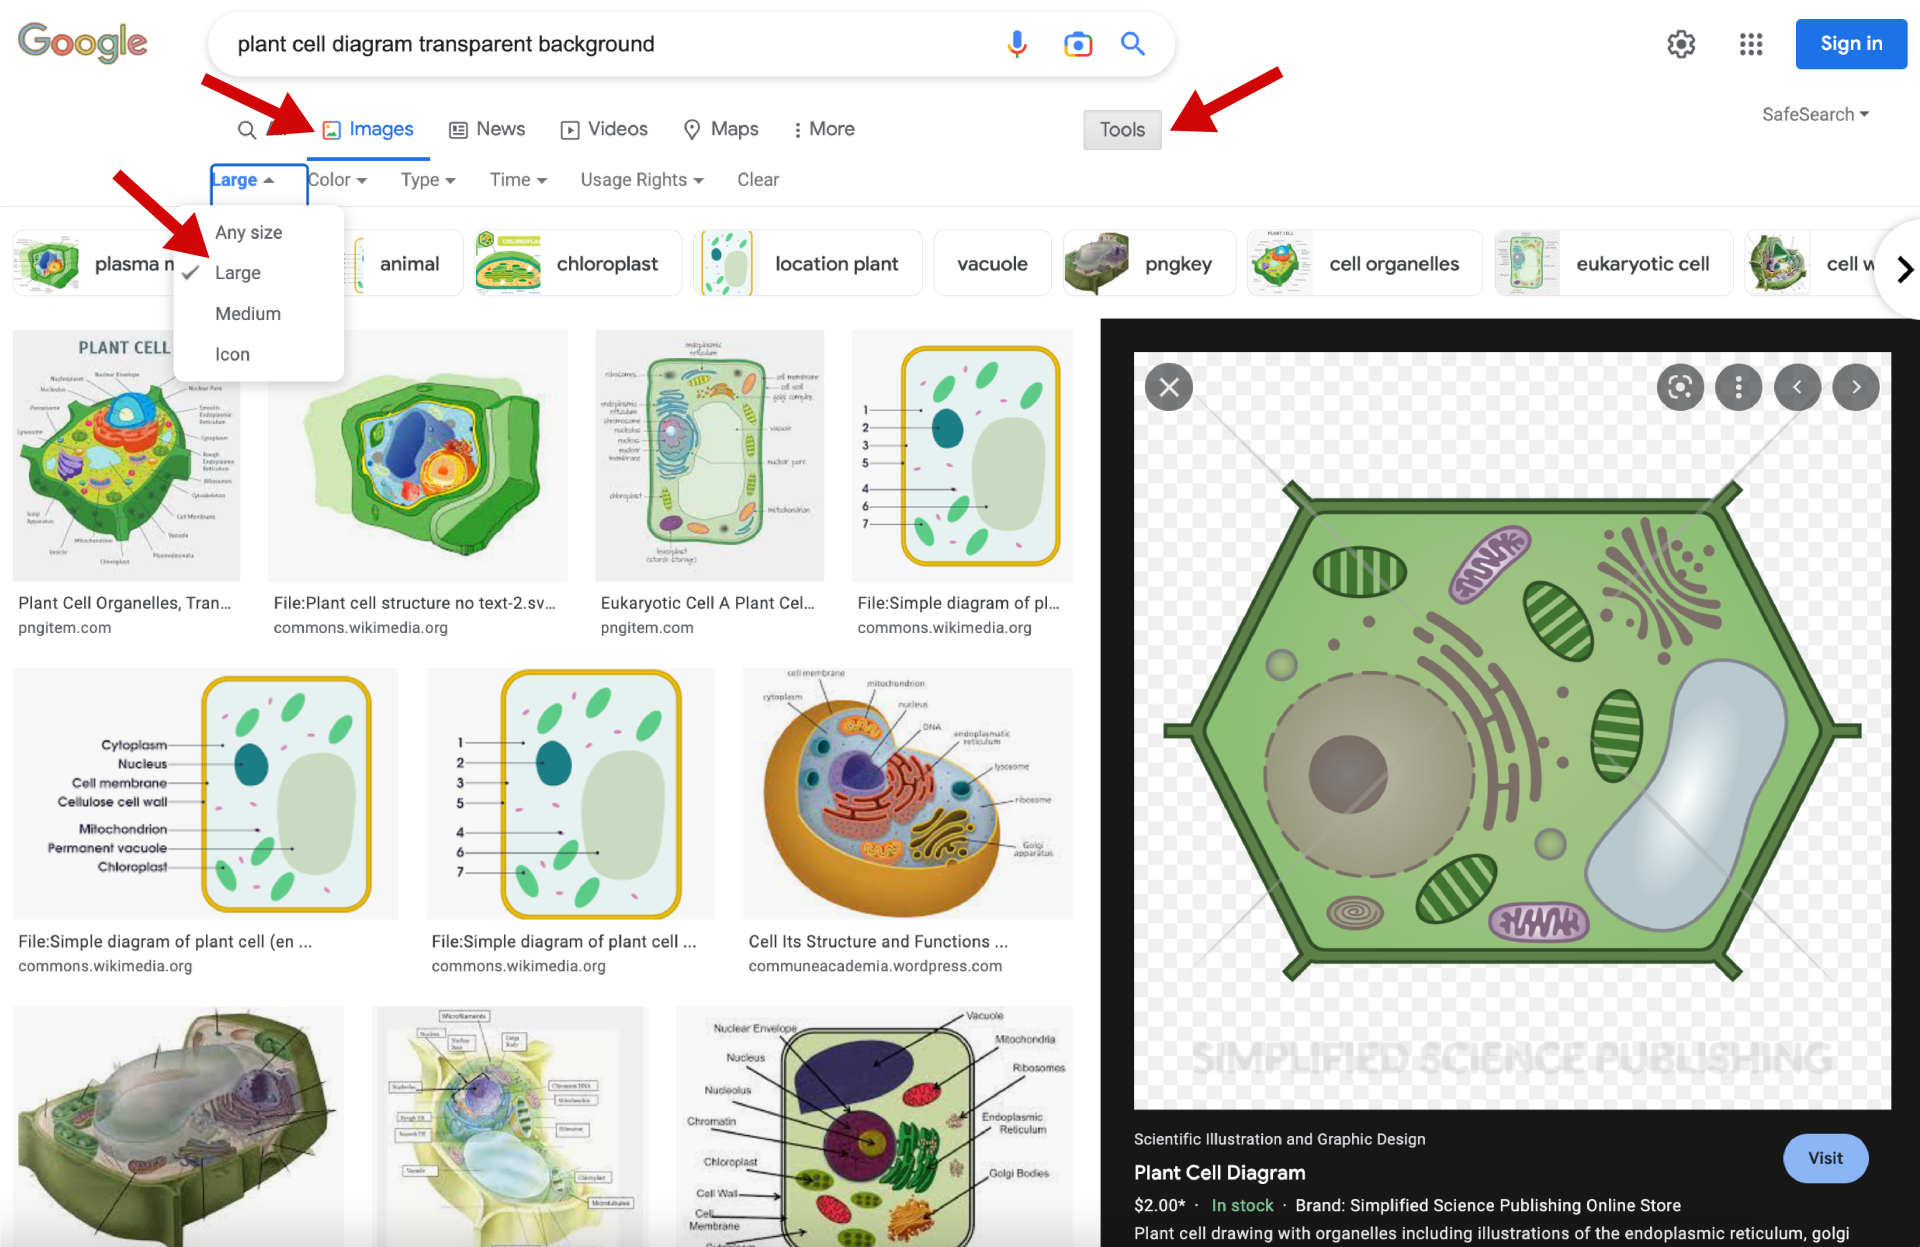 Plant cell image with transparent background example